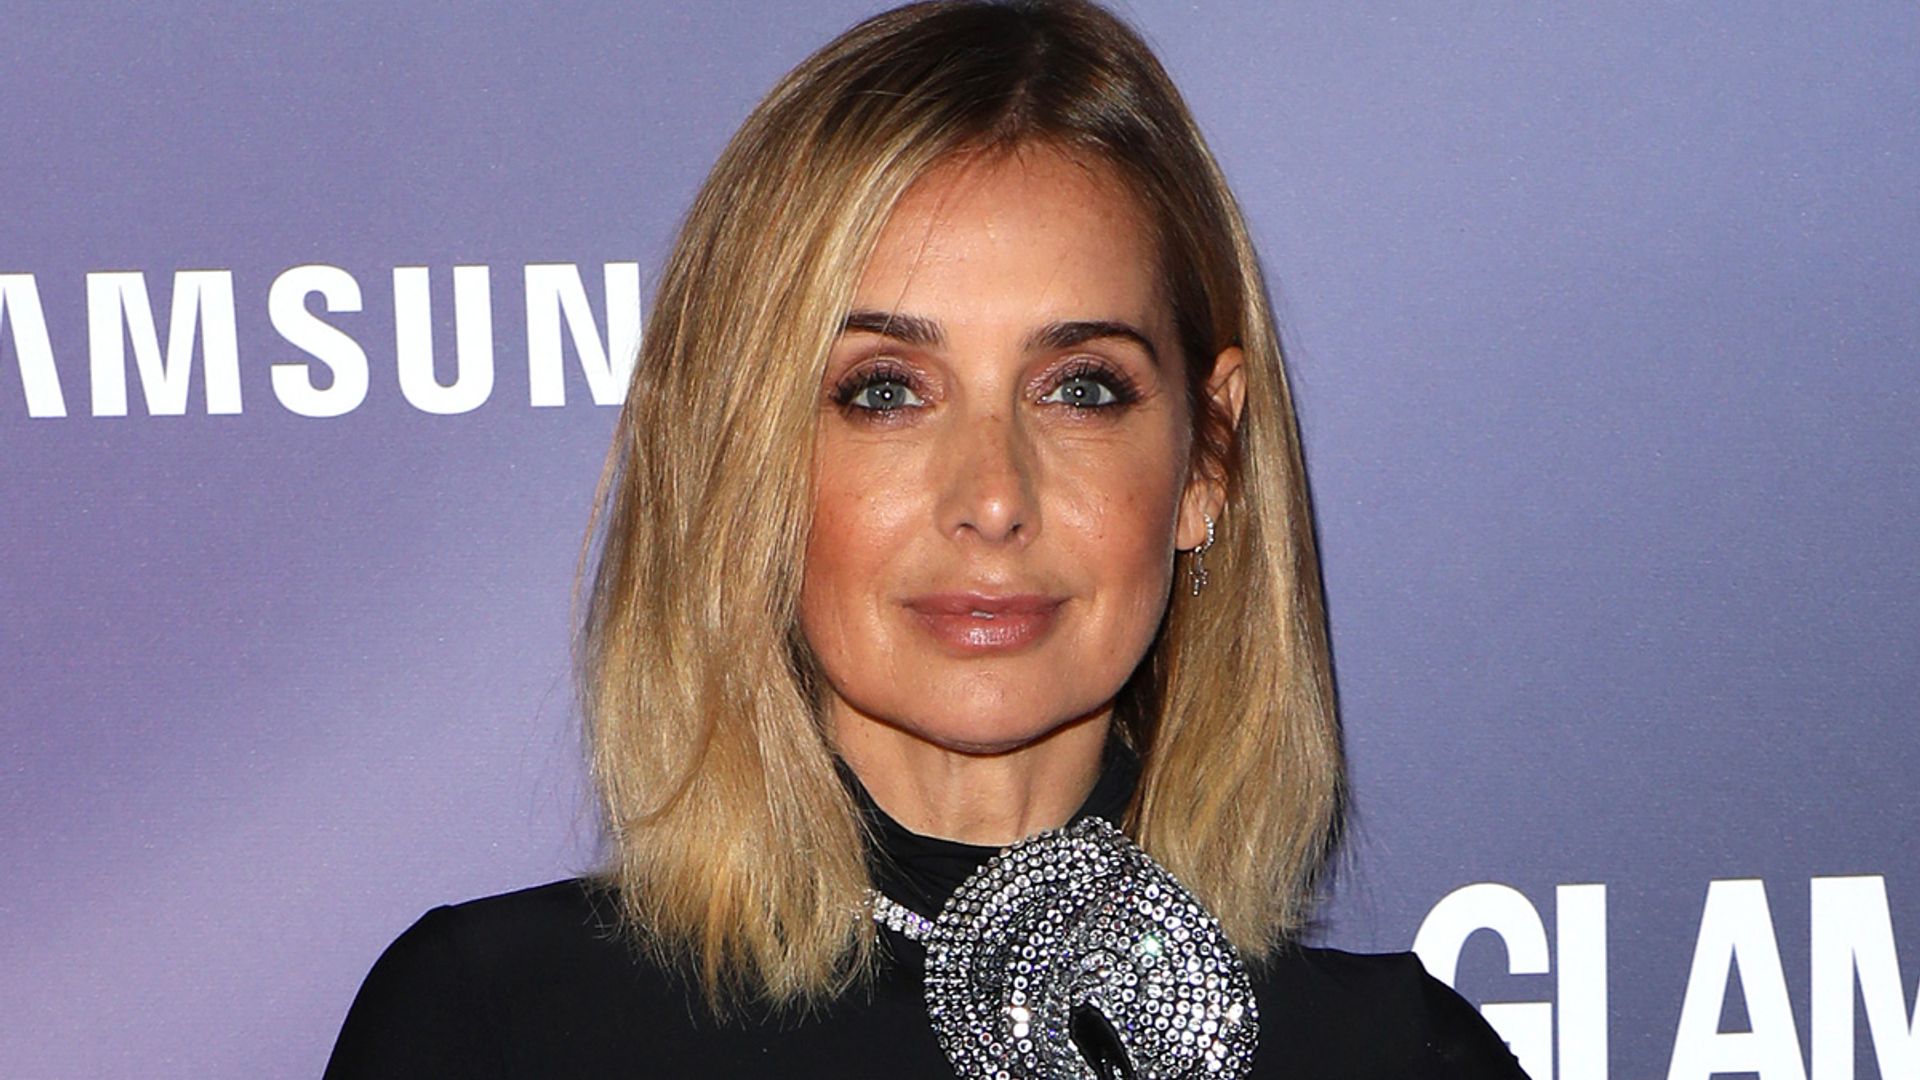 Louise Redknapp teases career news in boyfriend jeans and retro top